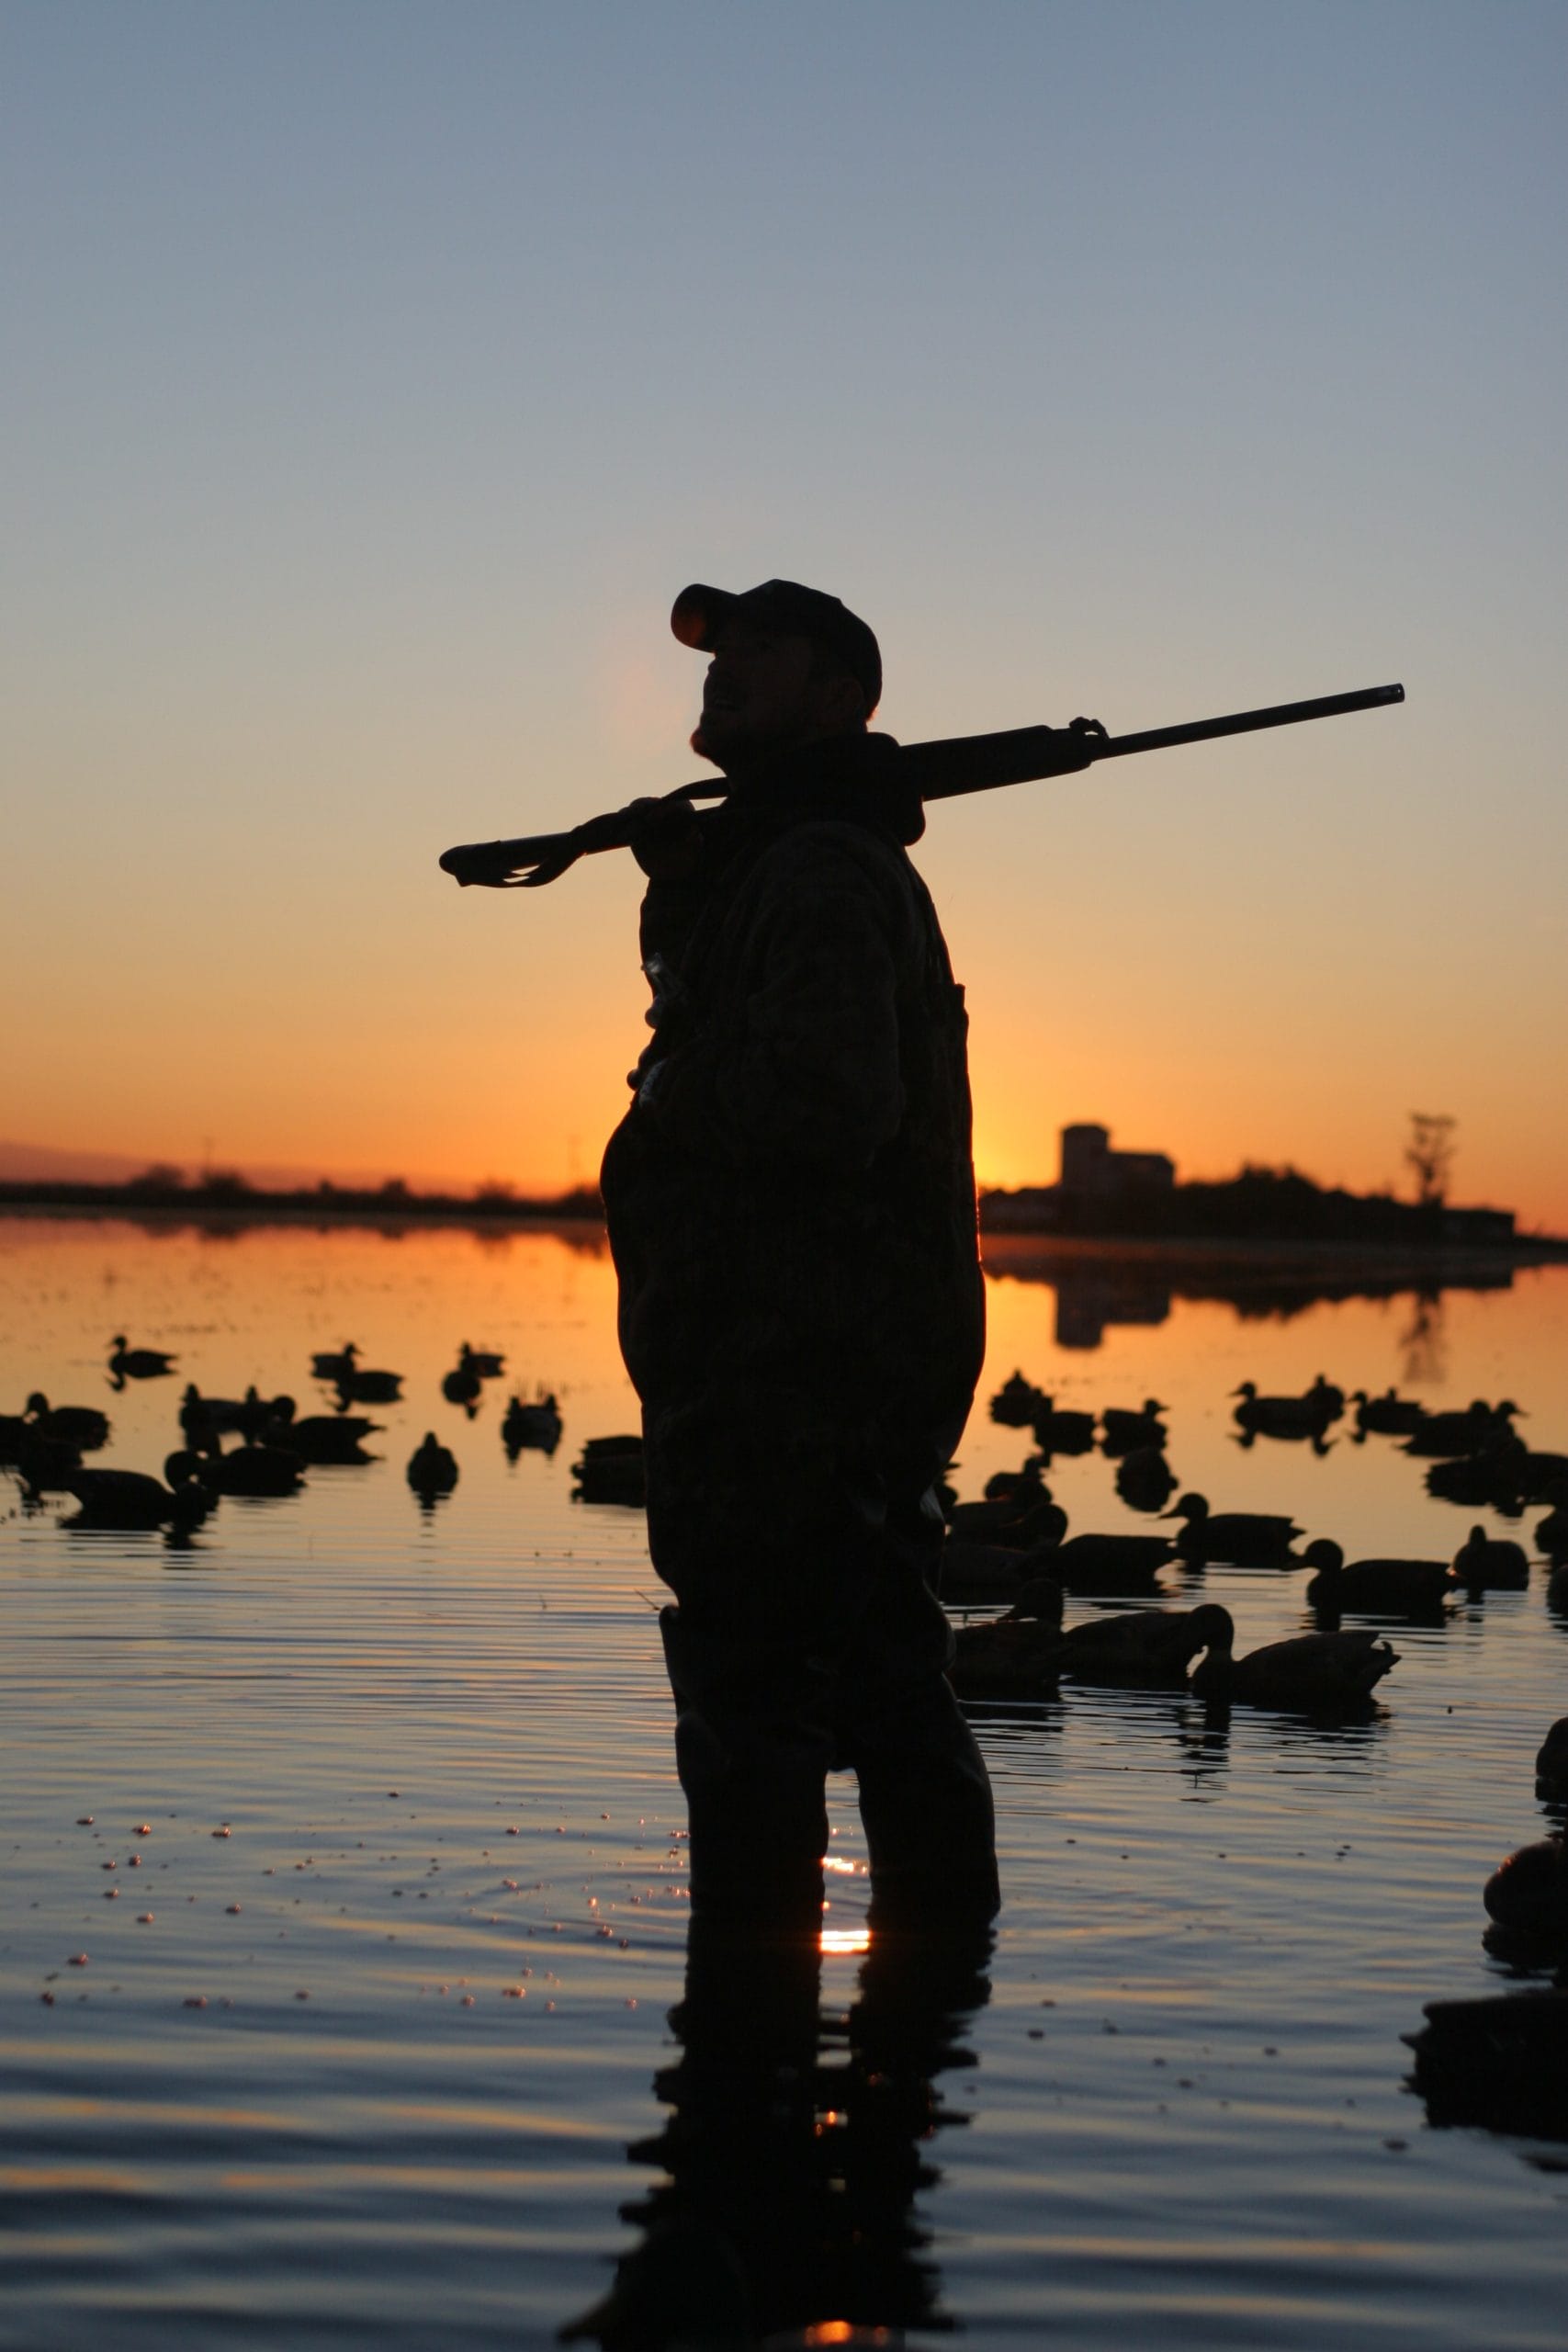 Despite dry conditions in much of the country, the region known as the duck factory saw abundant moisture. This is shaping up to be a banner year for waterfowl—as long as you can find a puddle deep enough to float a decoy.